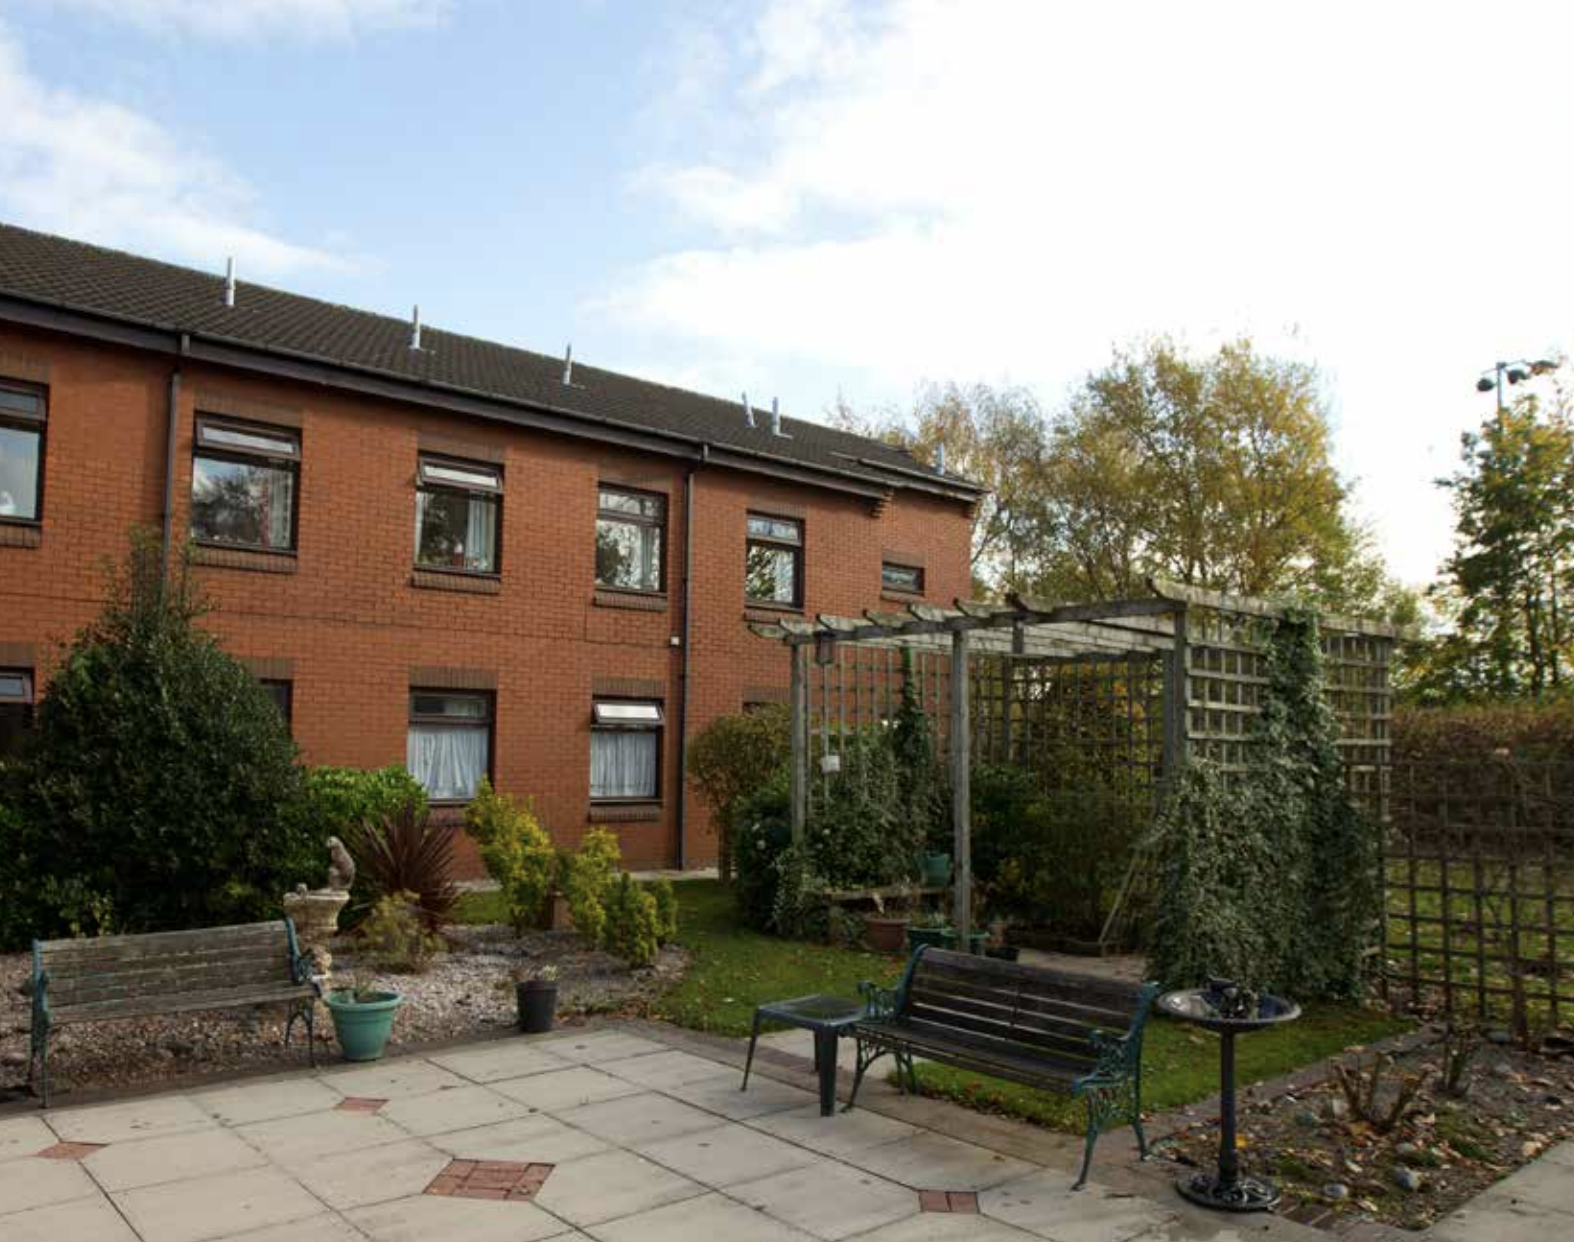 Minster Care Group - Lakelands Wigan care home 12